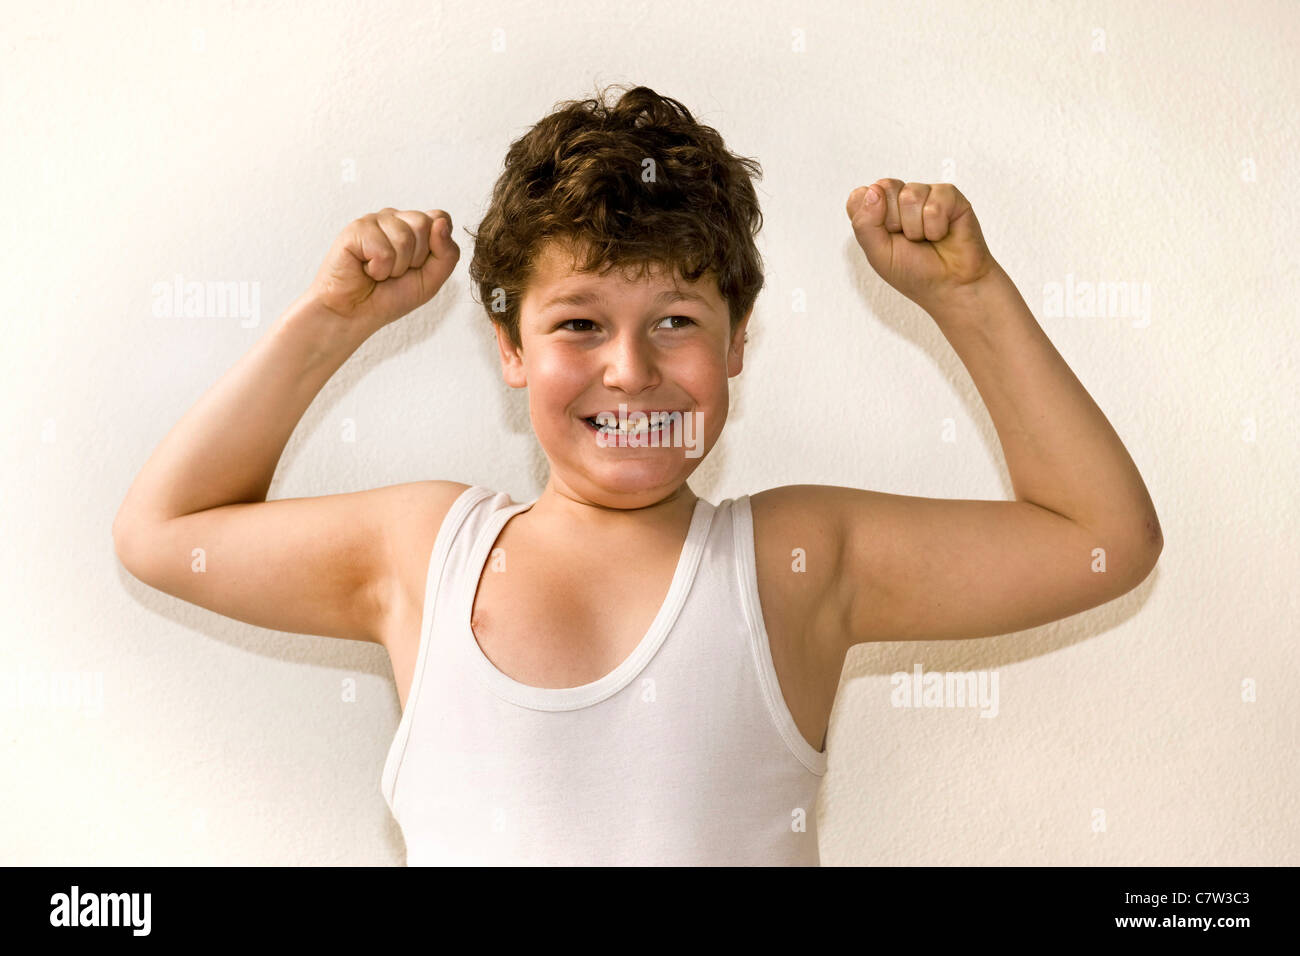 Boy showing his muscles like a strongman Stock Photo